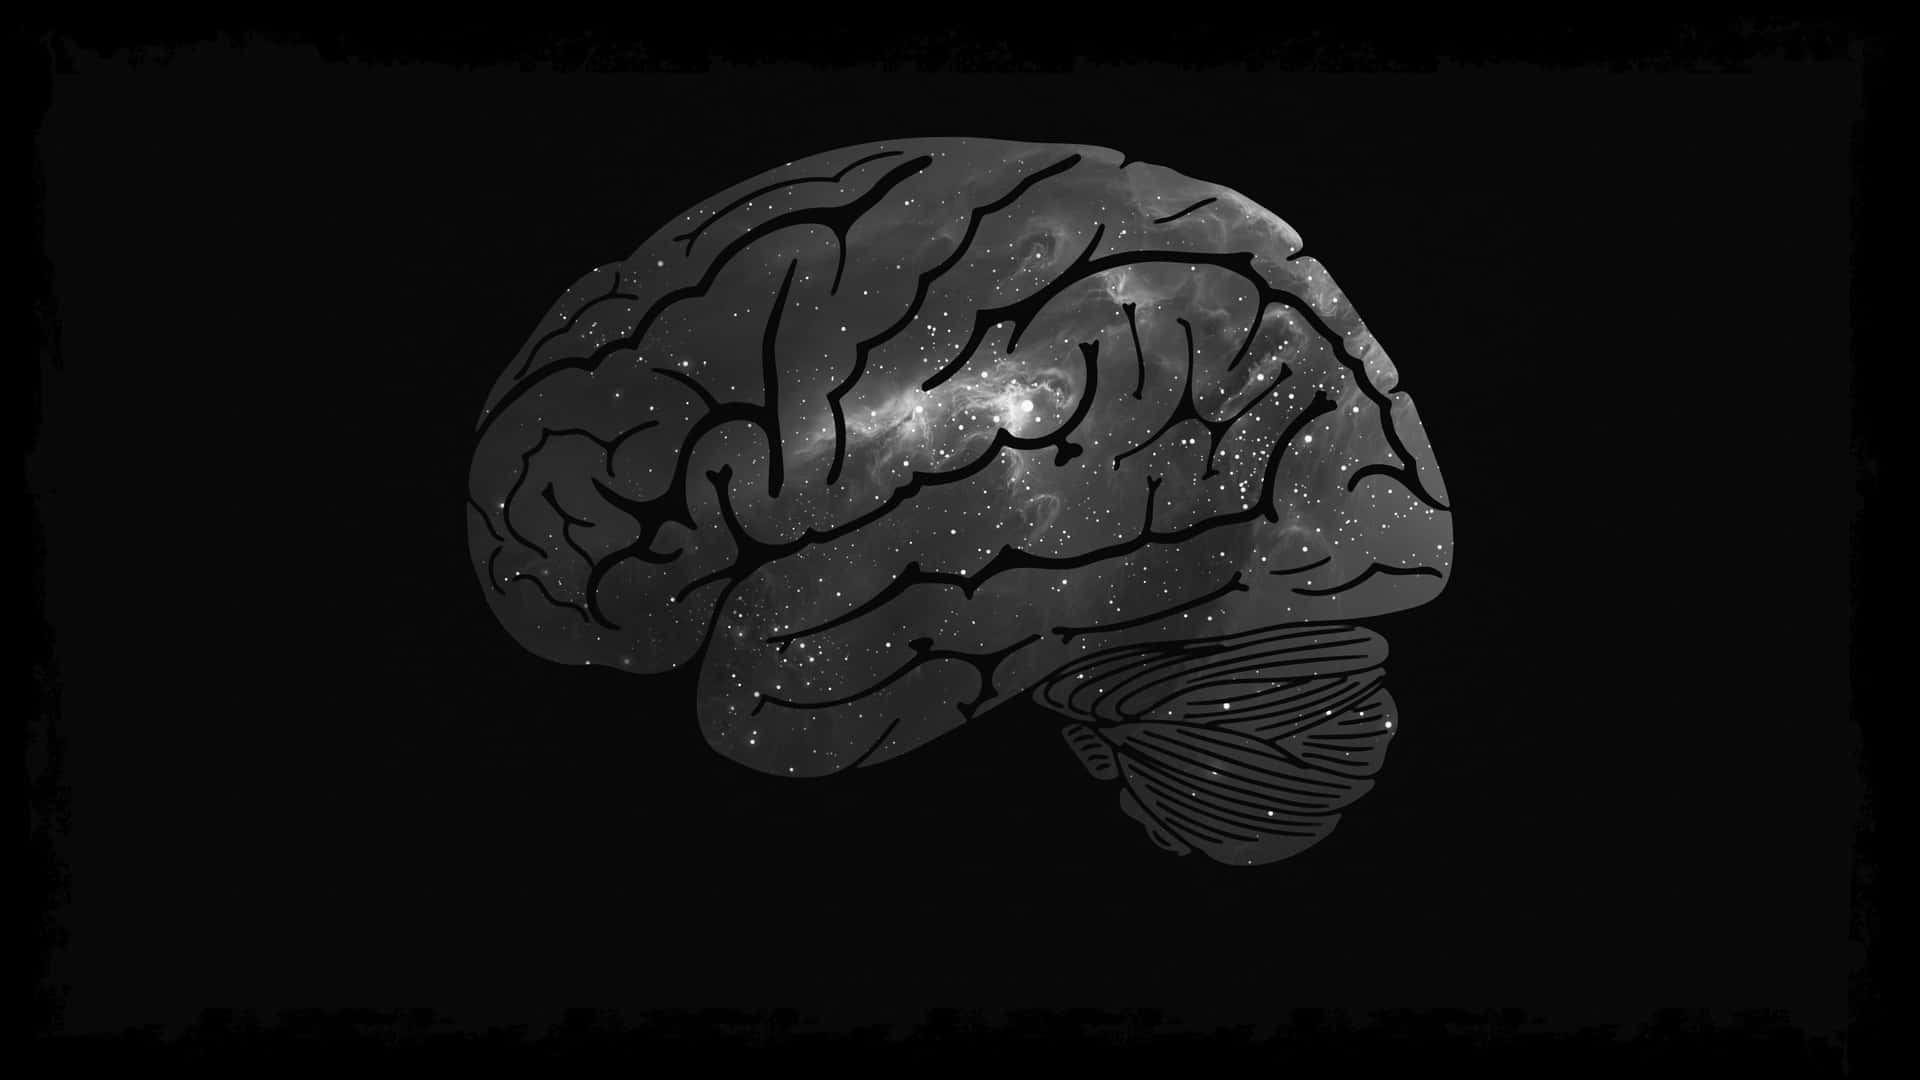 A Black And White Image Of A Brain